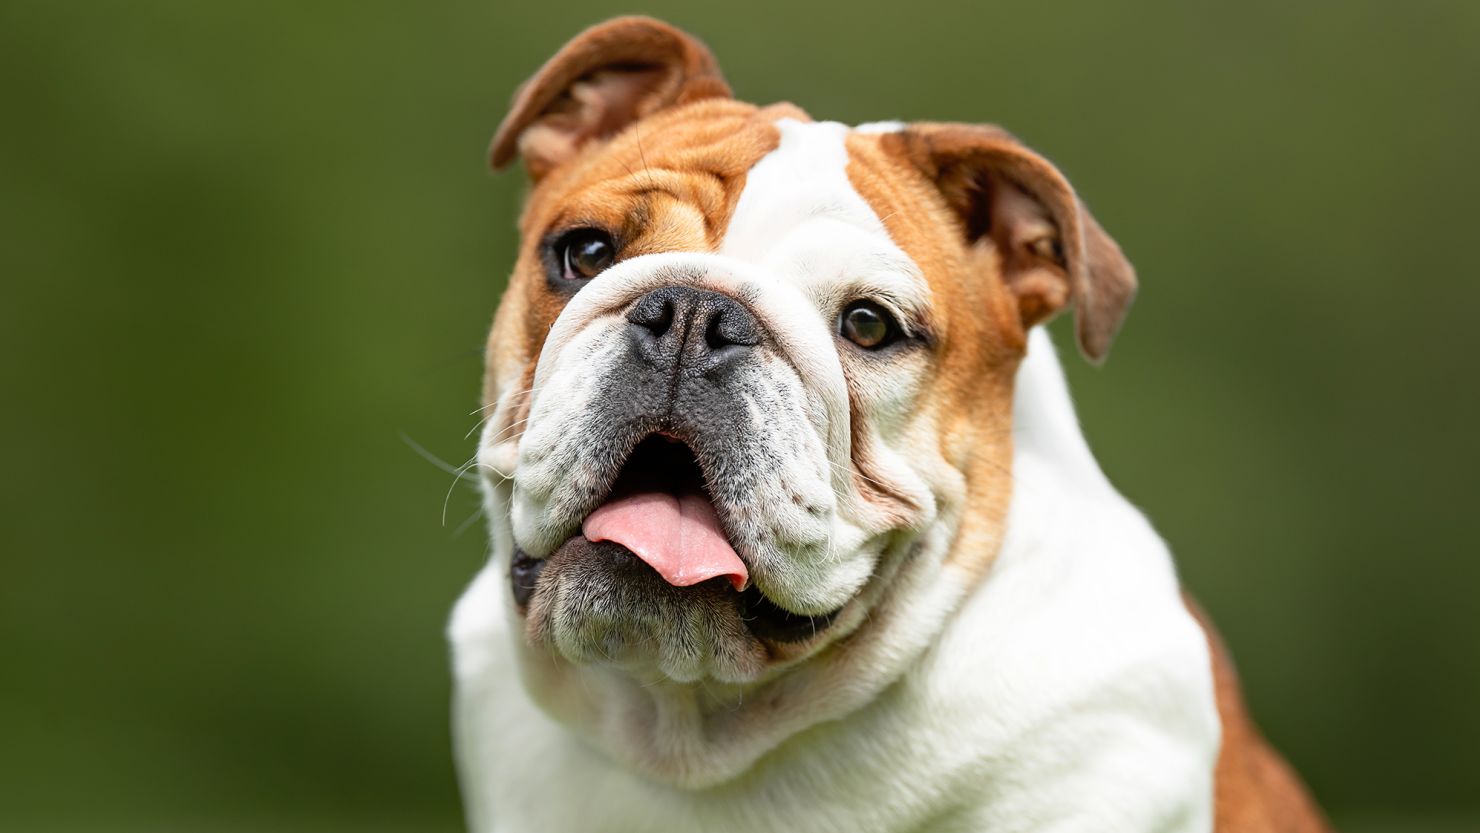 15 Best Types Of Bully Dog Breeds - A-Z Animals